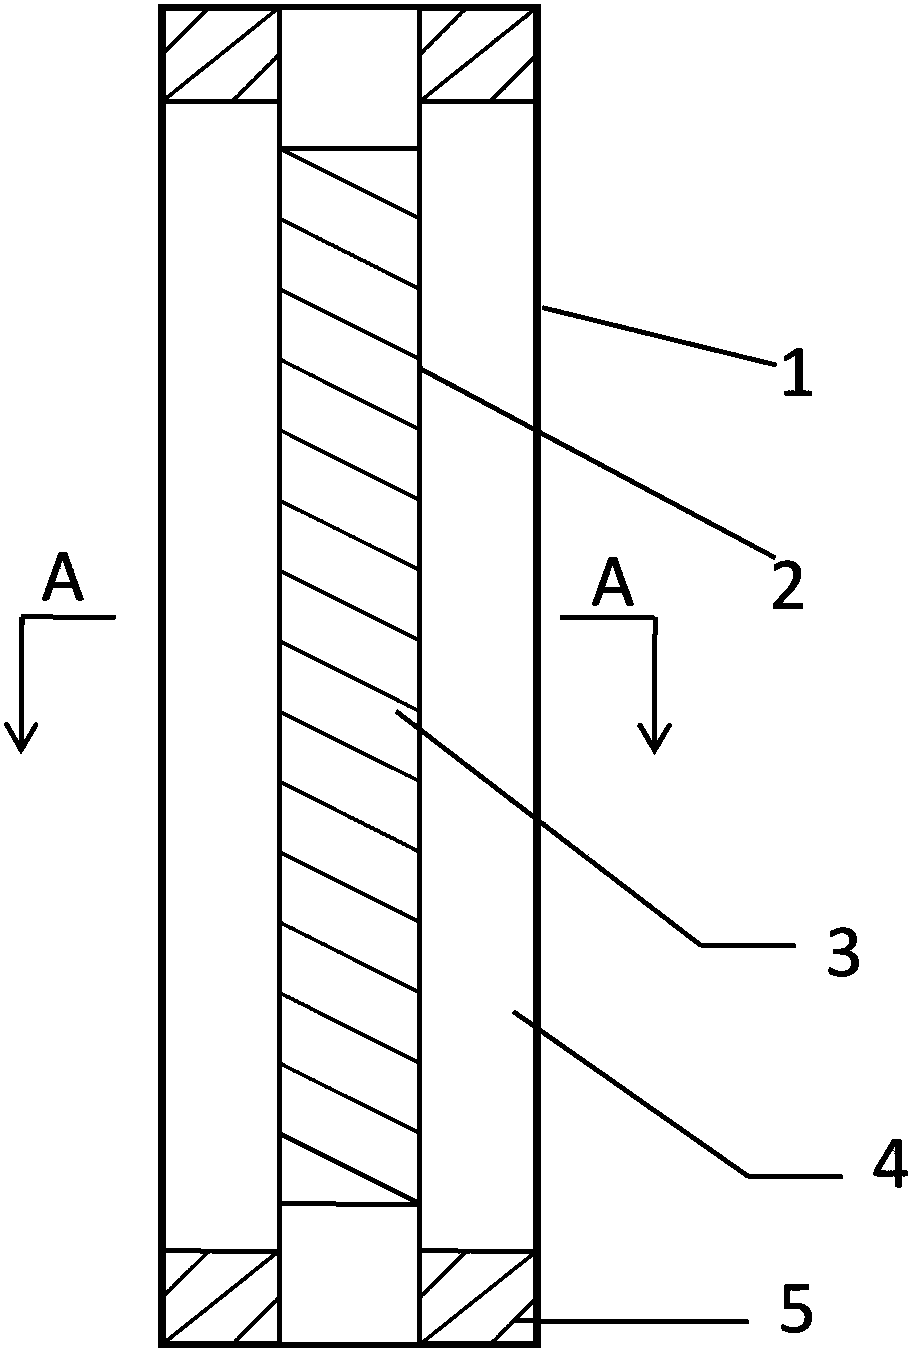 Device based on liquid metal and used for repairing defective peripheral nerve function